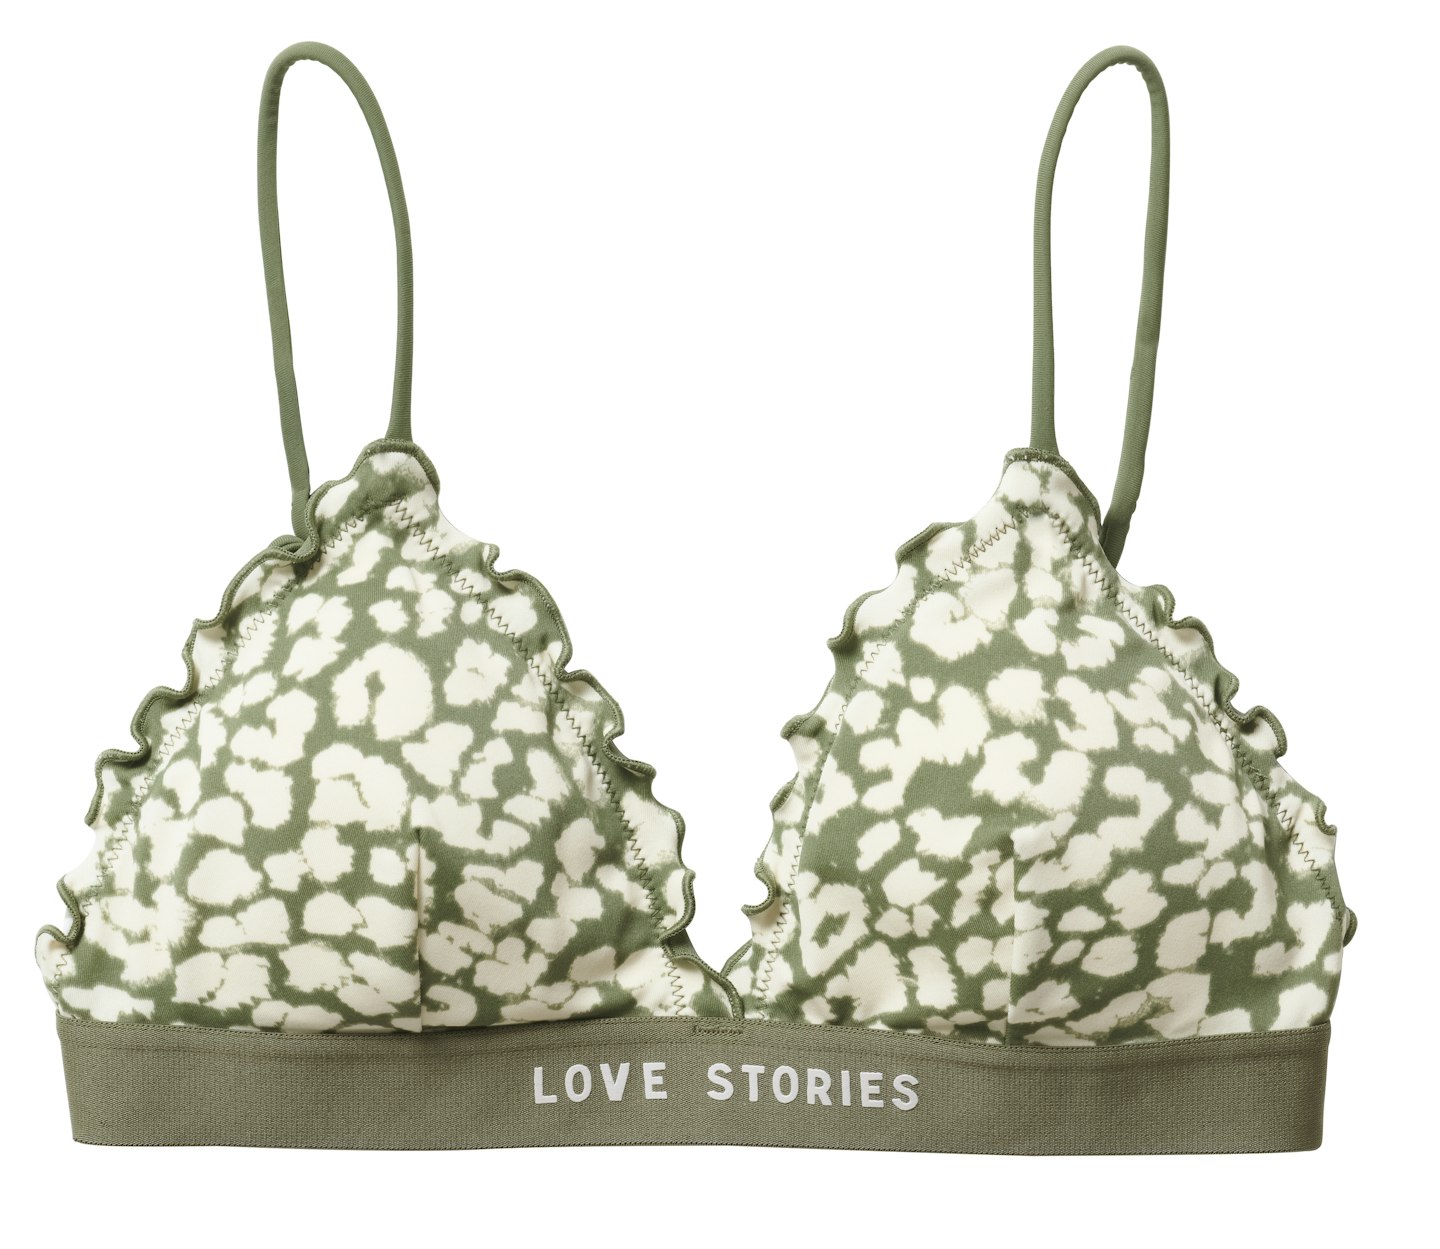 H&M is launching a lingerie collection with Love Stories